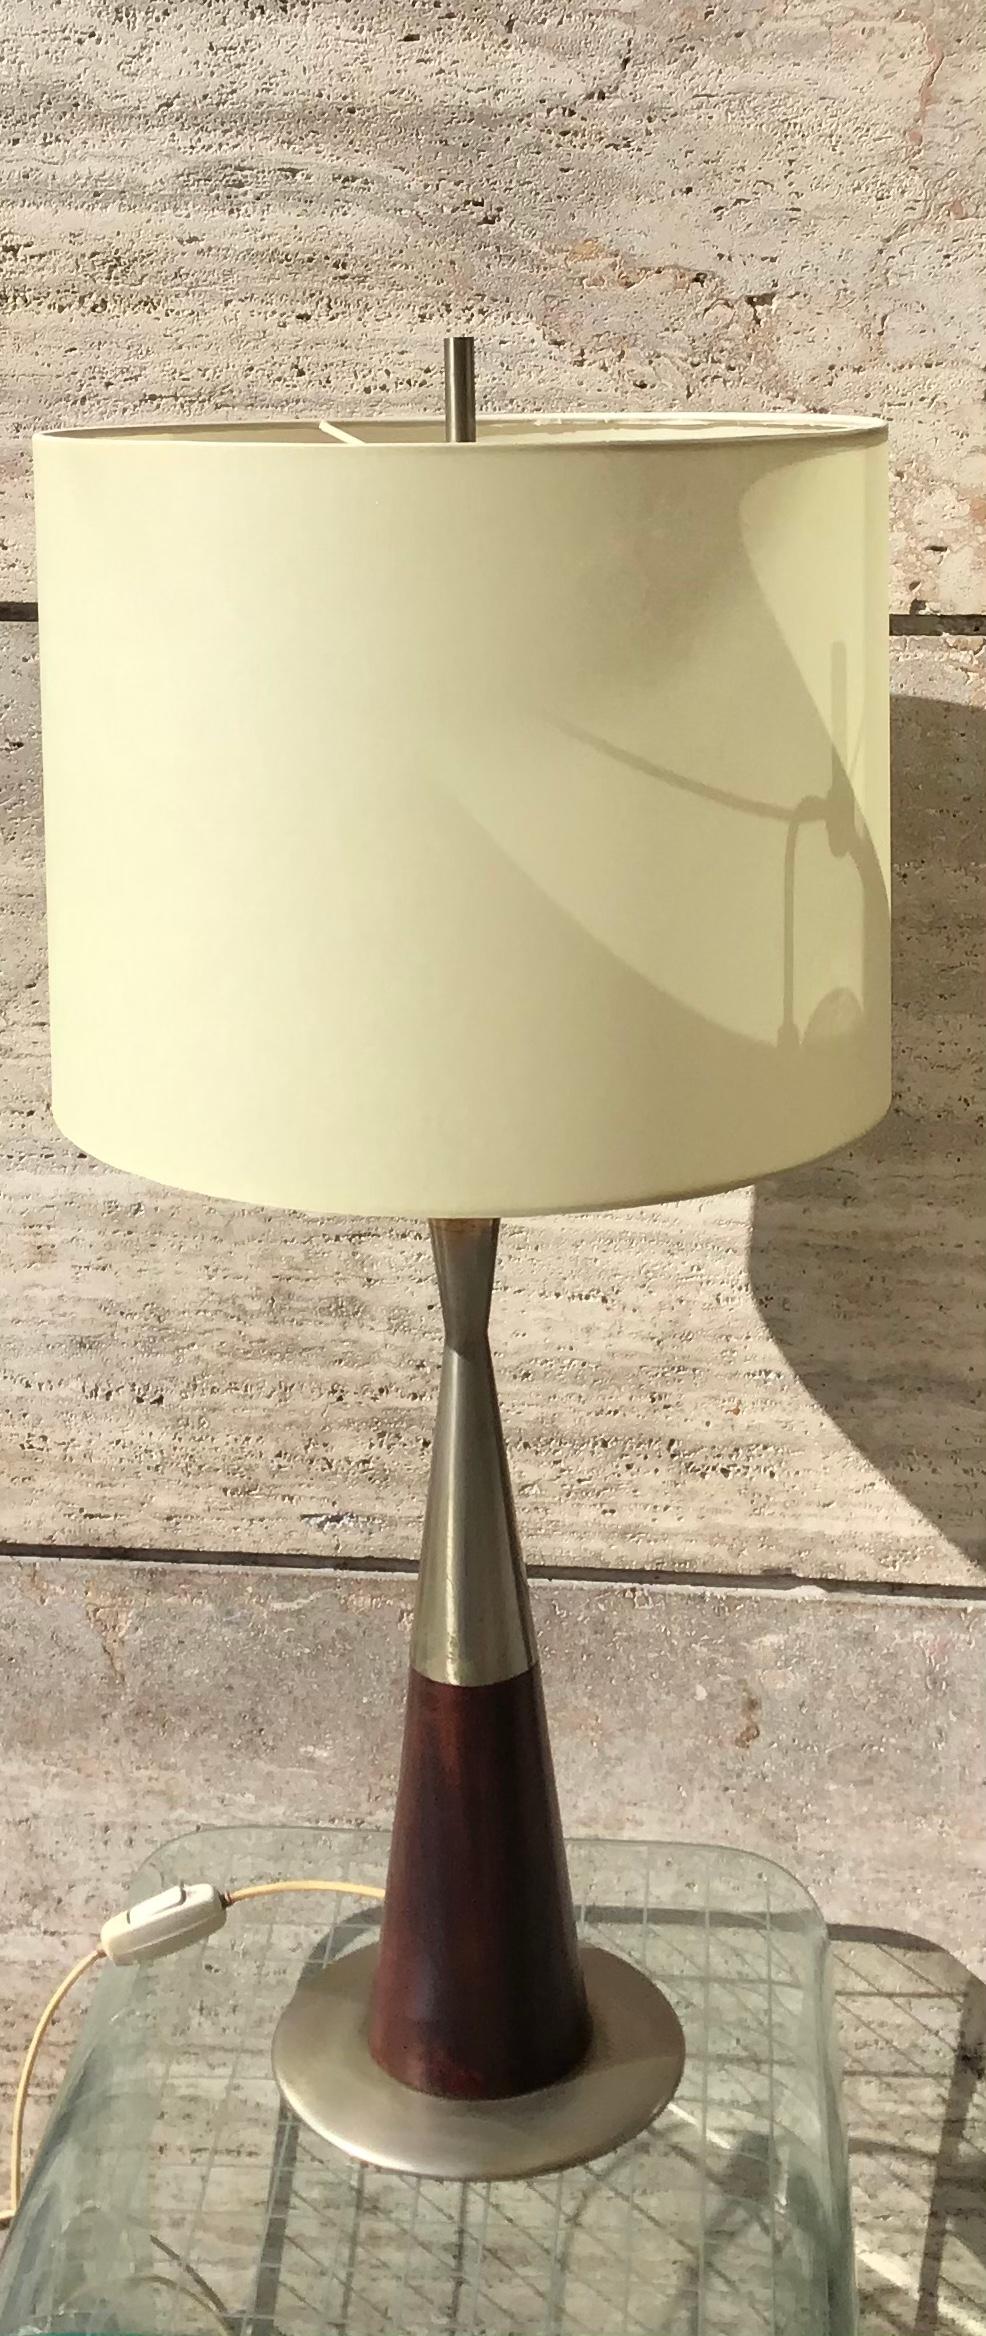 Mid-20th Century Stilnovo Table Lamp Metal Crome Wood Lampshade, 1960, Italy For Sale